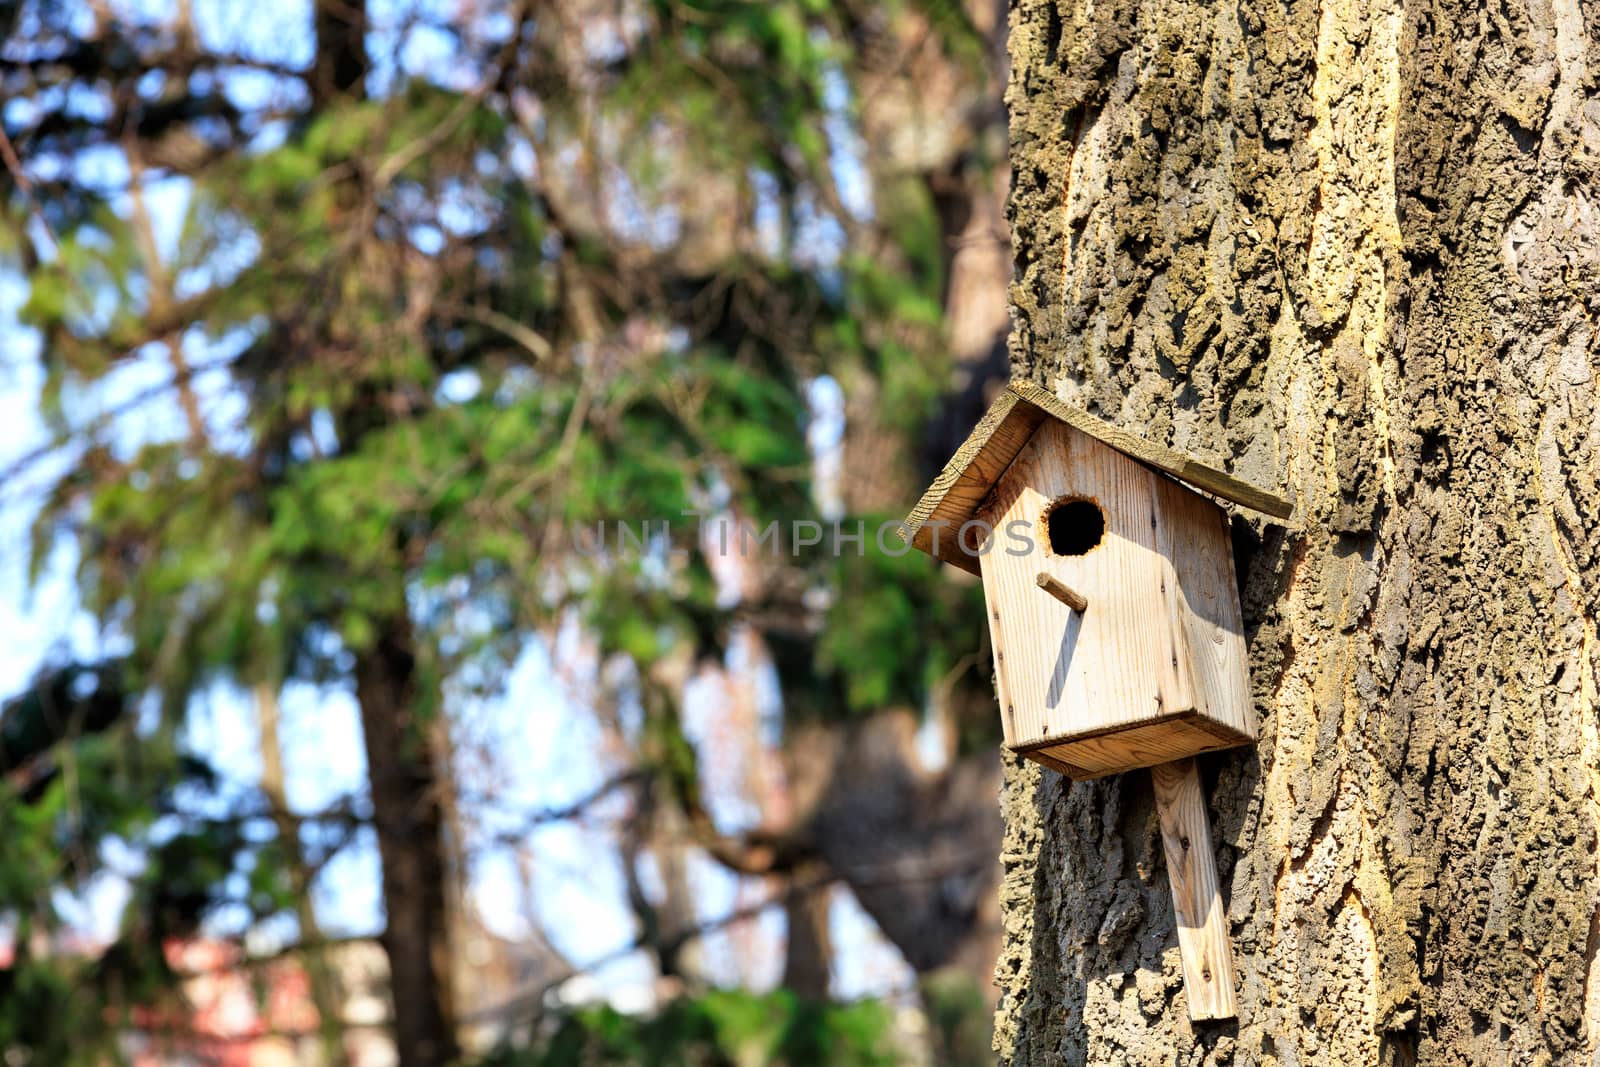 A wooden old birdhouse is attached to the tree by nails in the park against the background of a spring forest and blue sky in blur, close-up view and copy space.